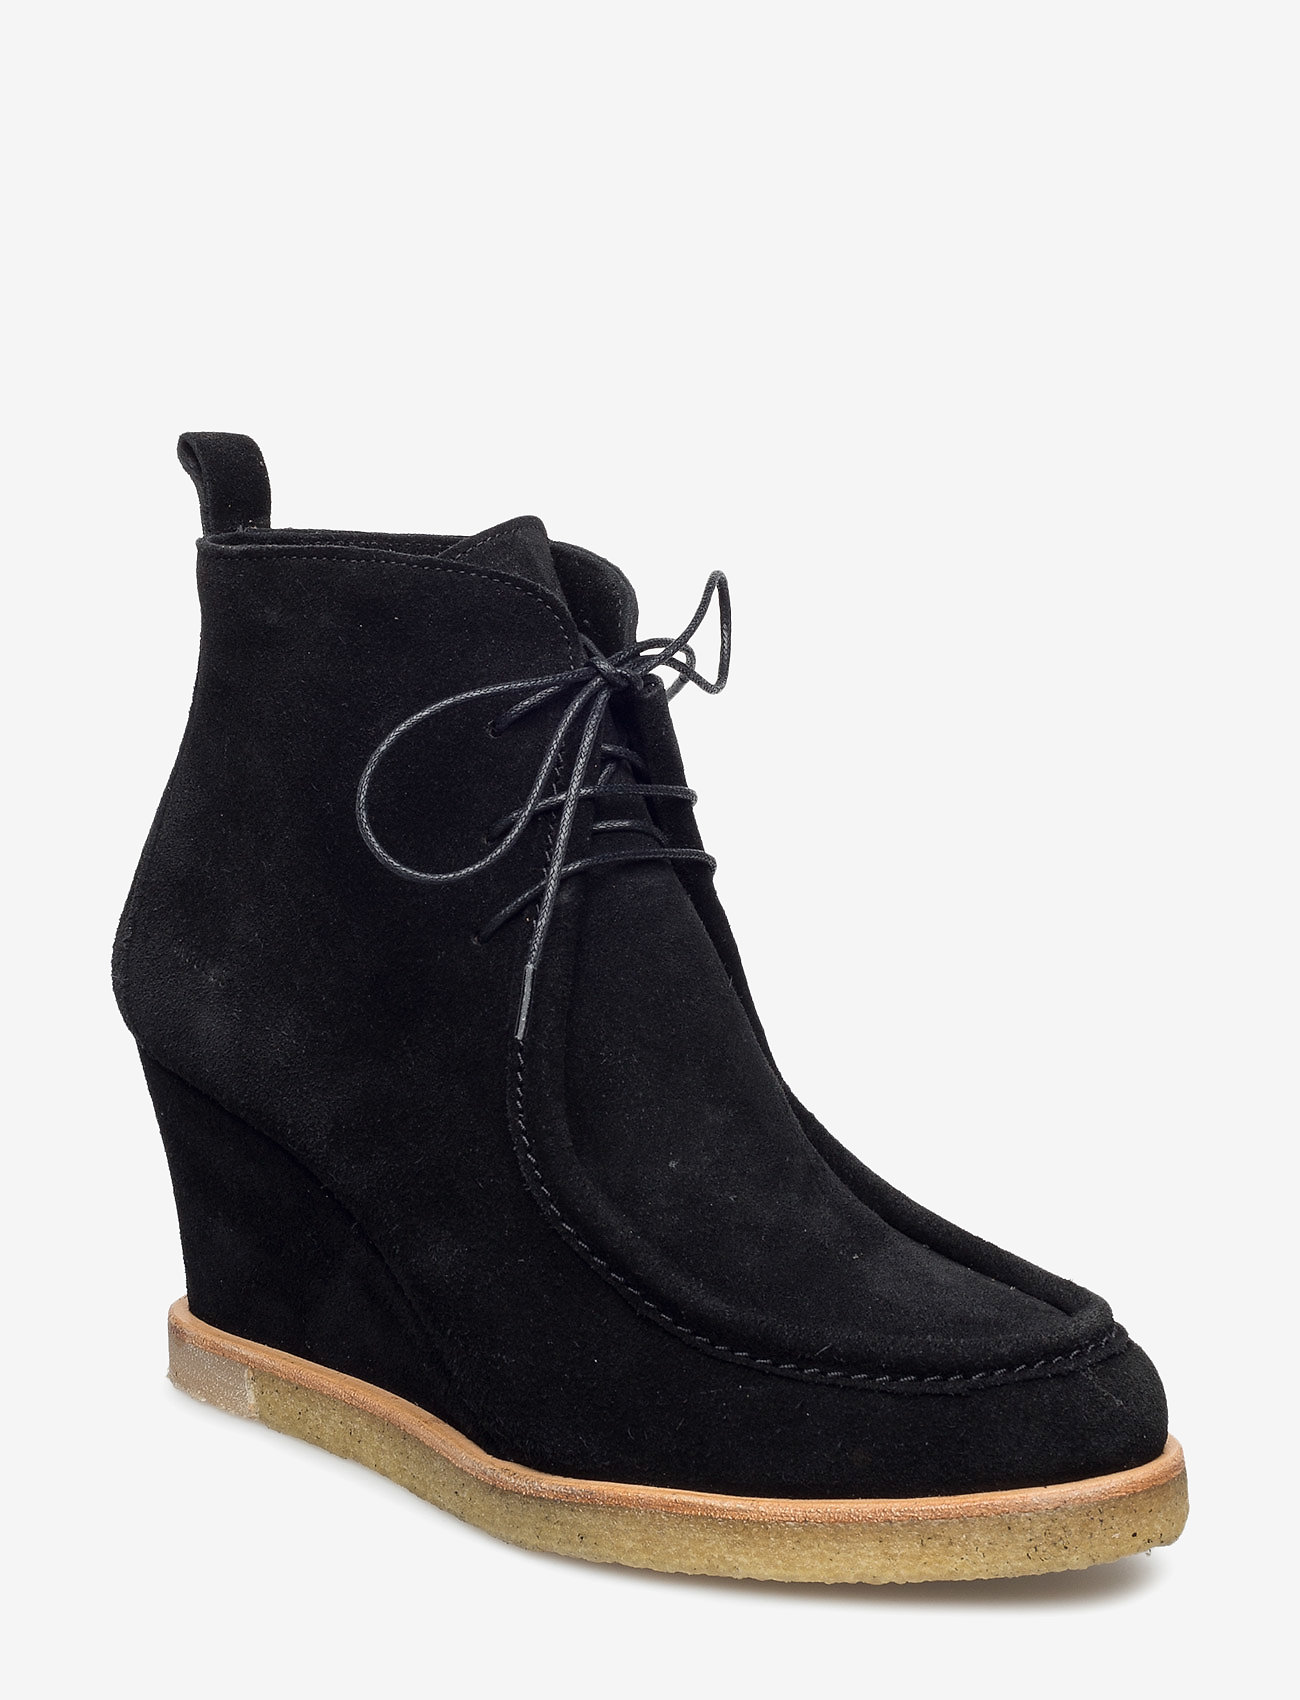 ANGULUS Booties - Wedge Heeled ankle boots | Boozt.com